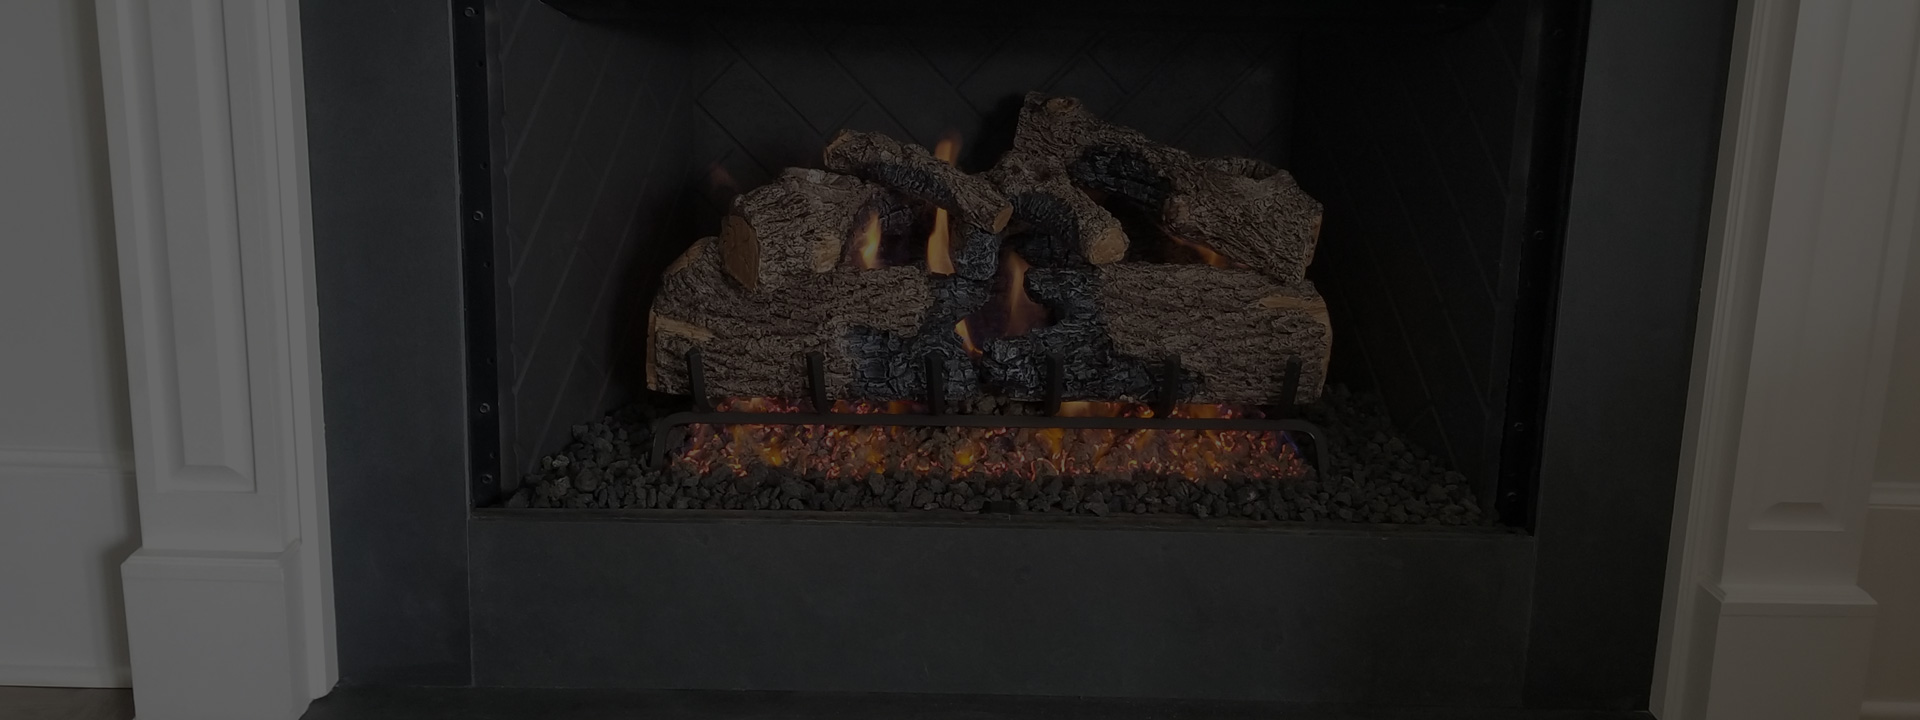 A fireplace with logs in it.